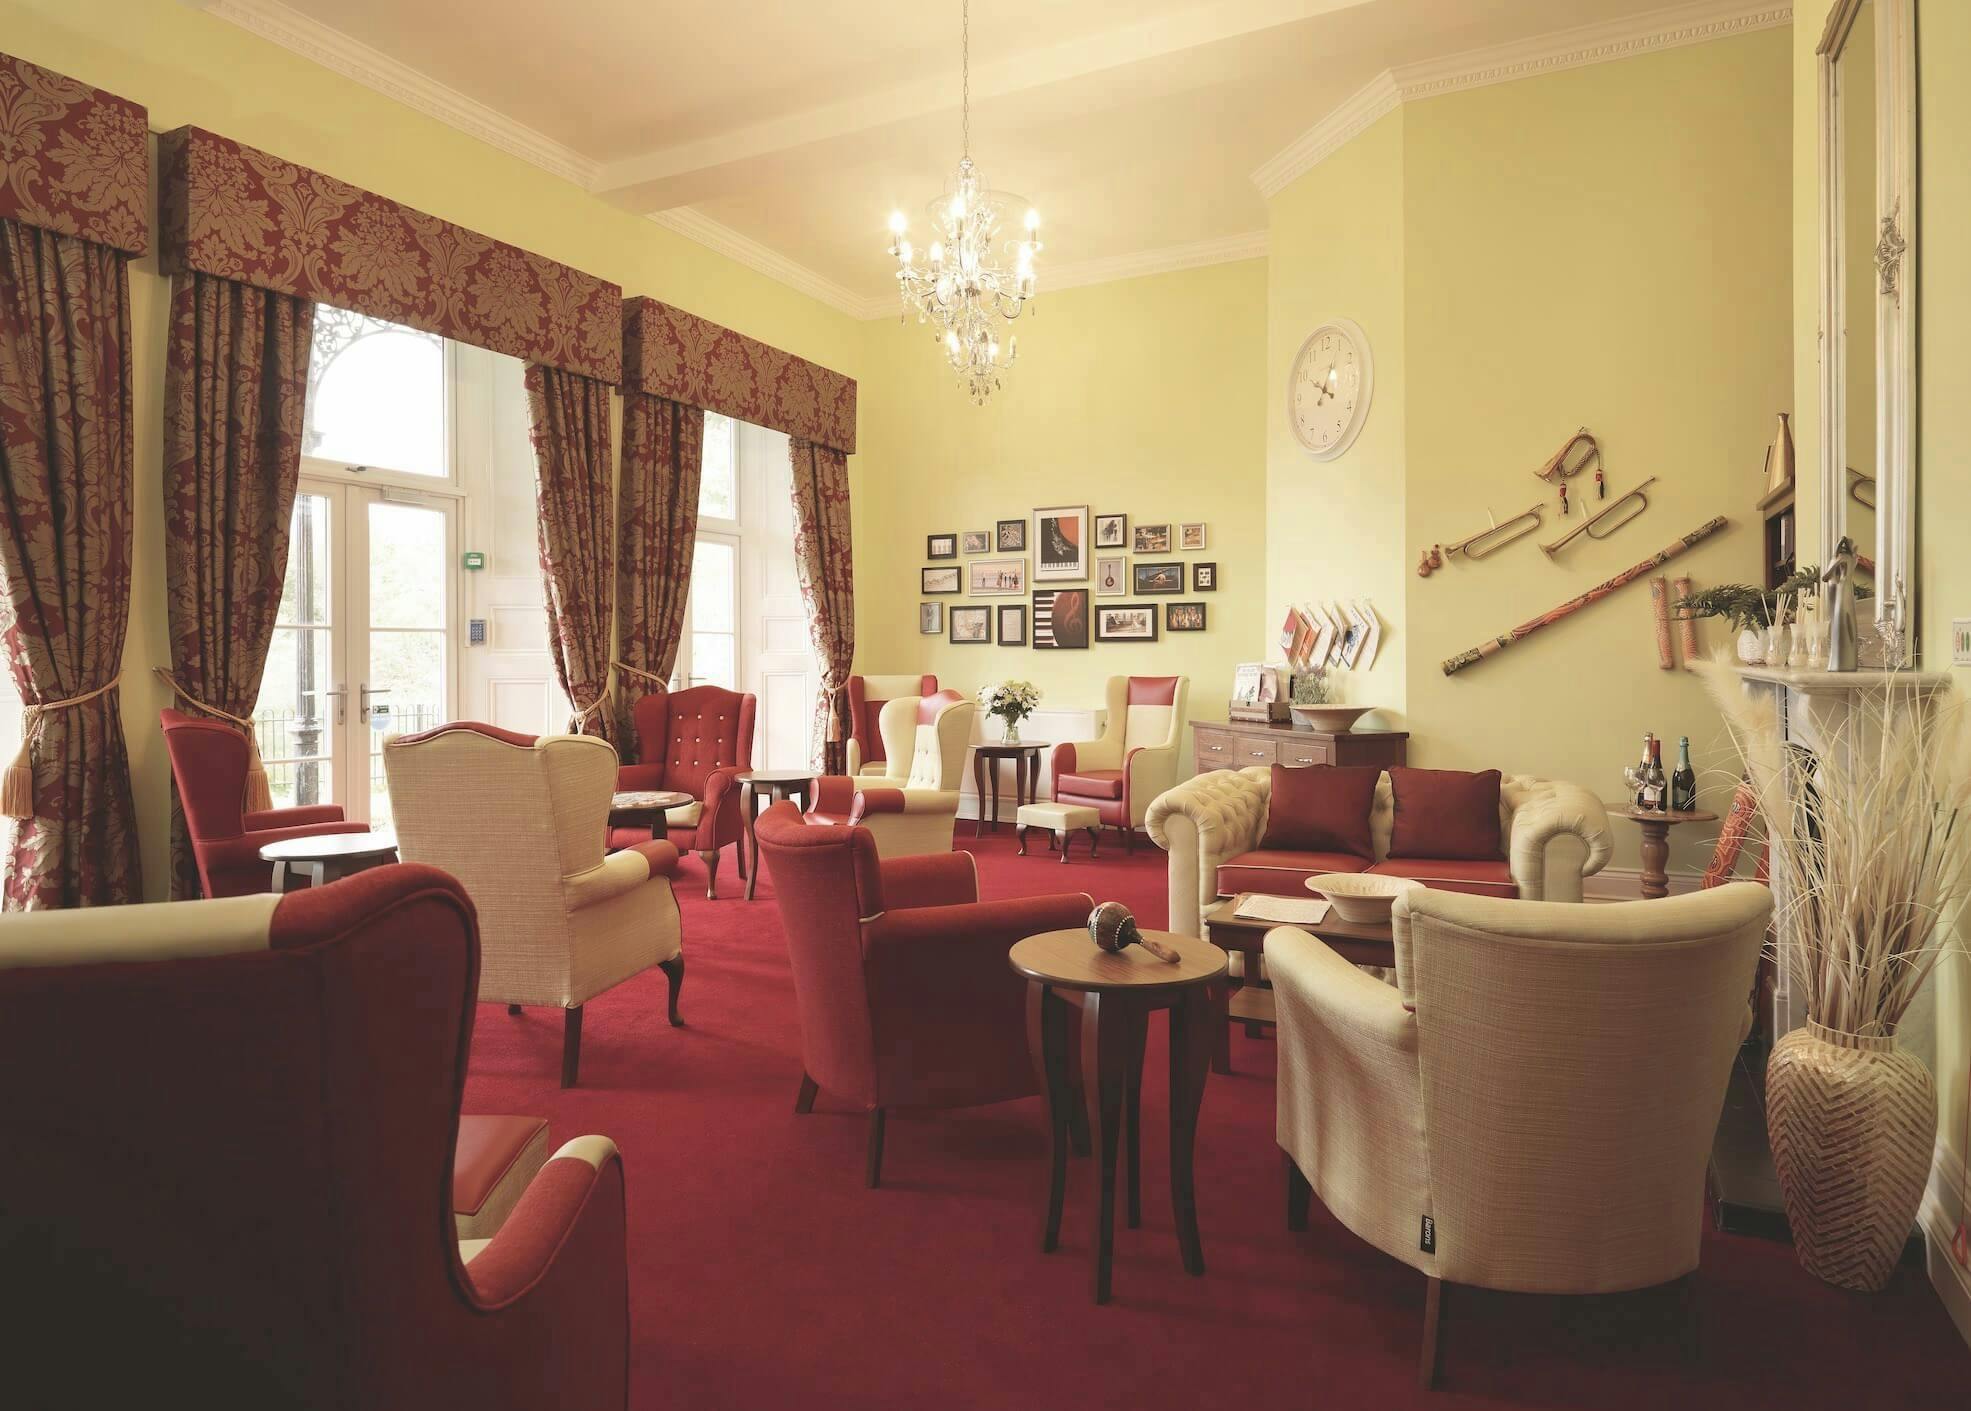 Communal Area at West Cliff Hall Care Home in Hythe, Kent